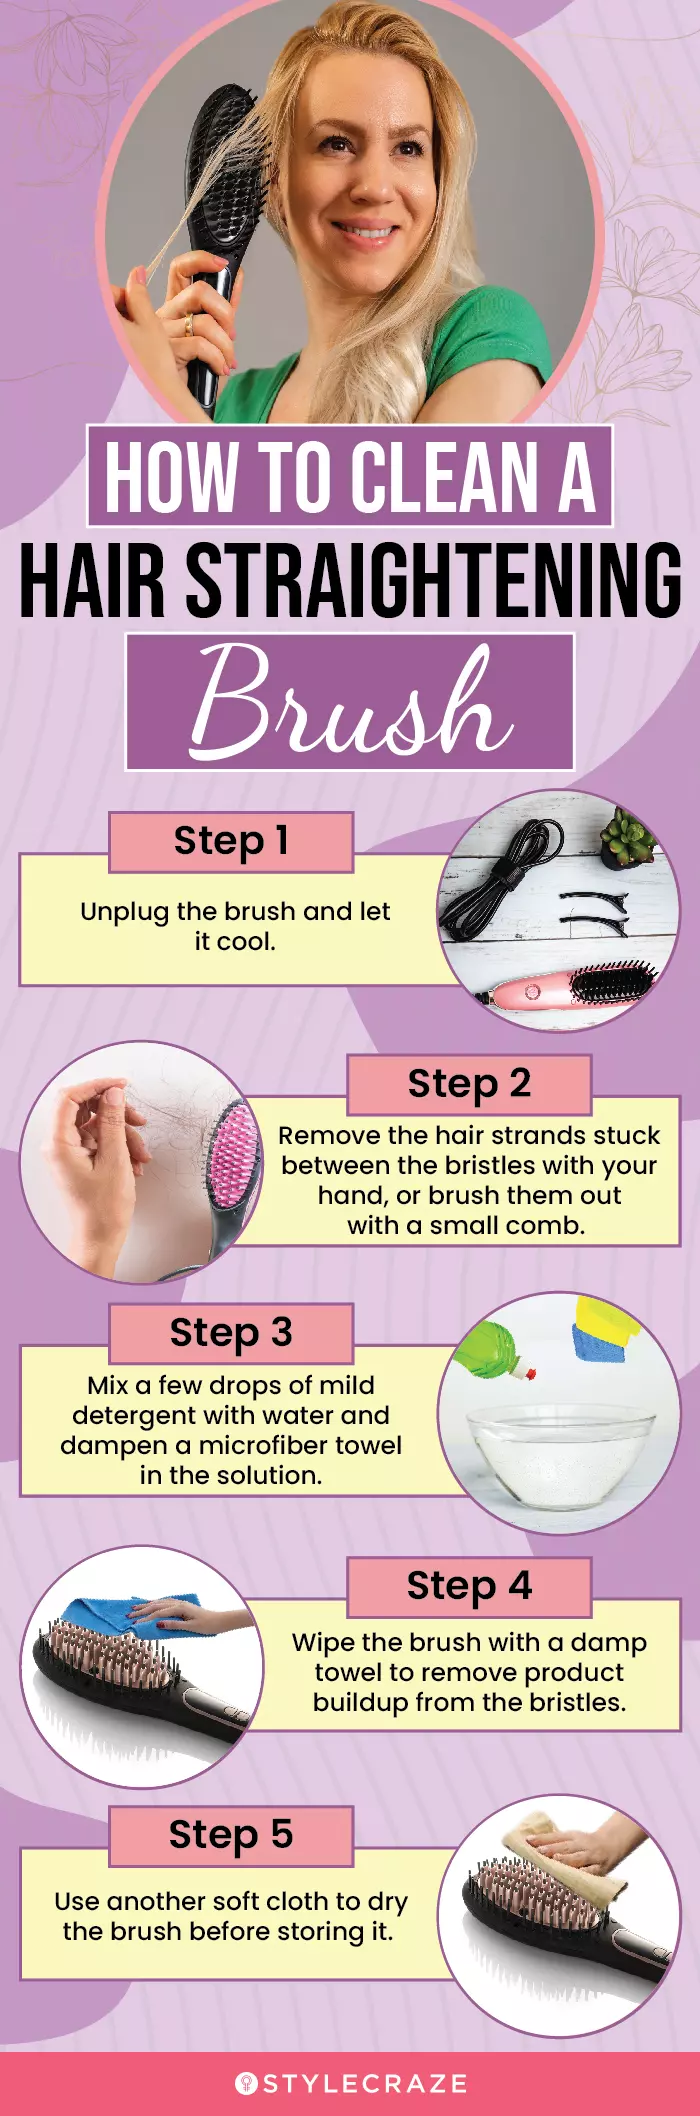 Tips To Clean A Hair Straightening Brush: Steps To Follow (infographic)